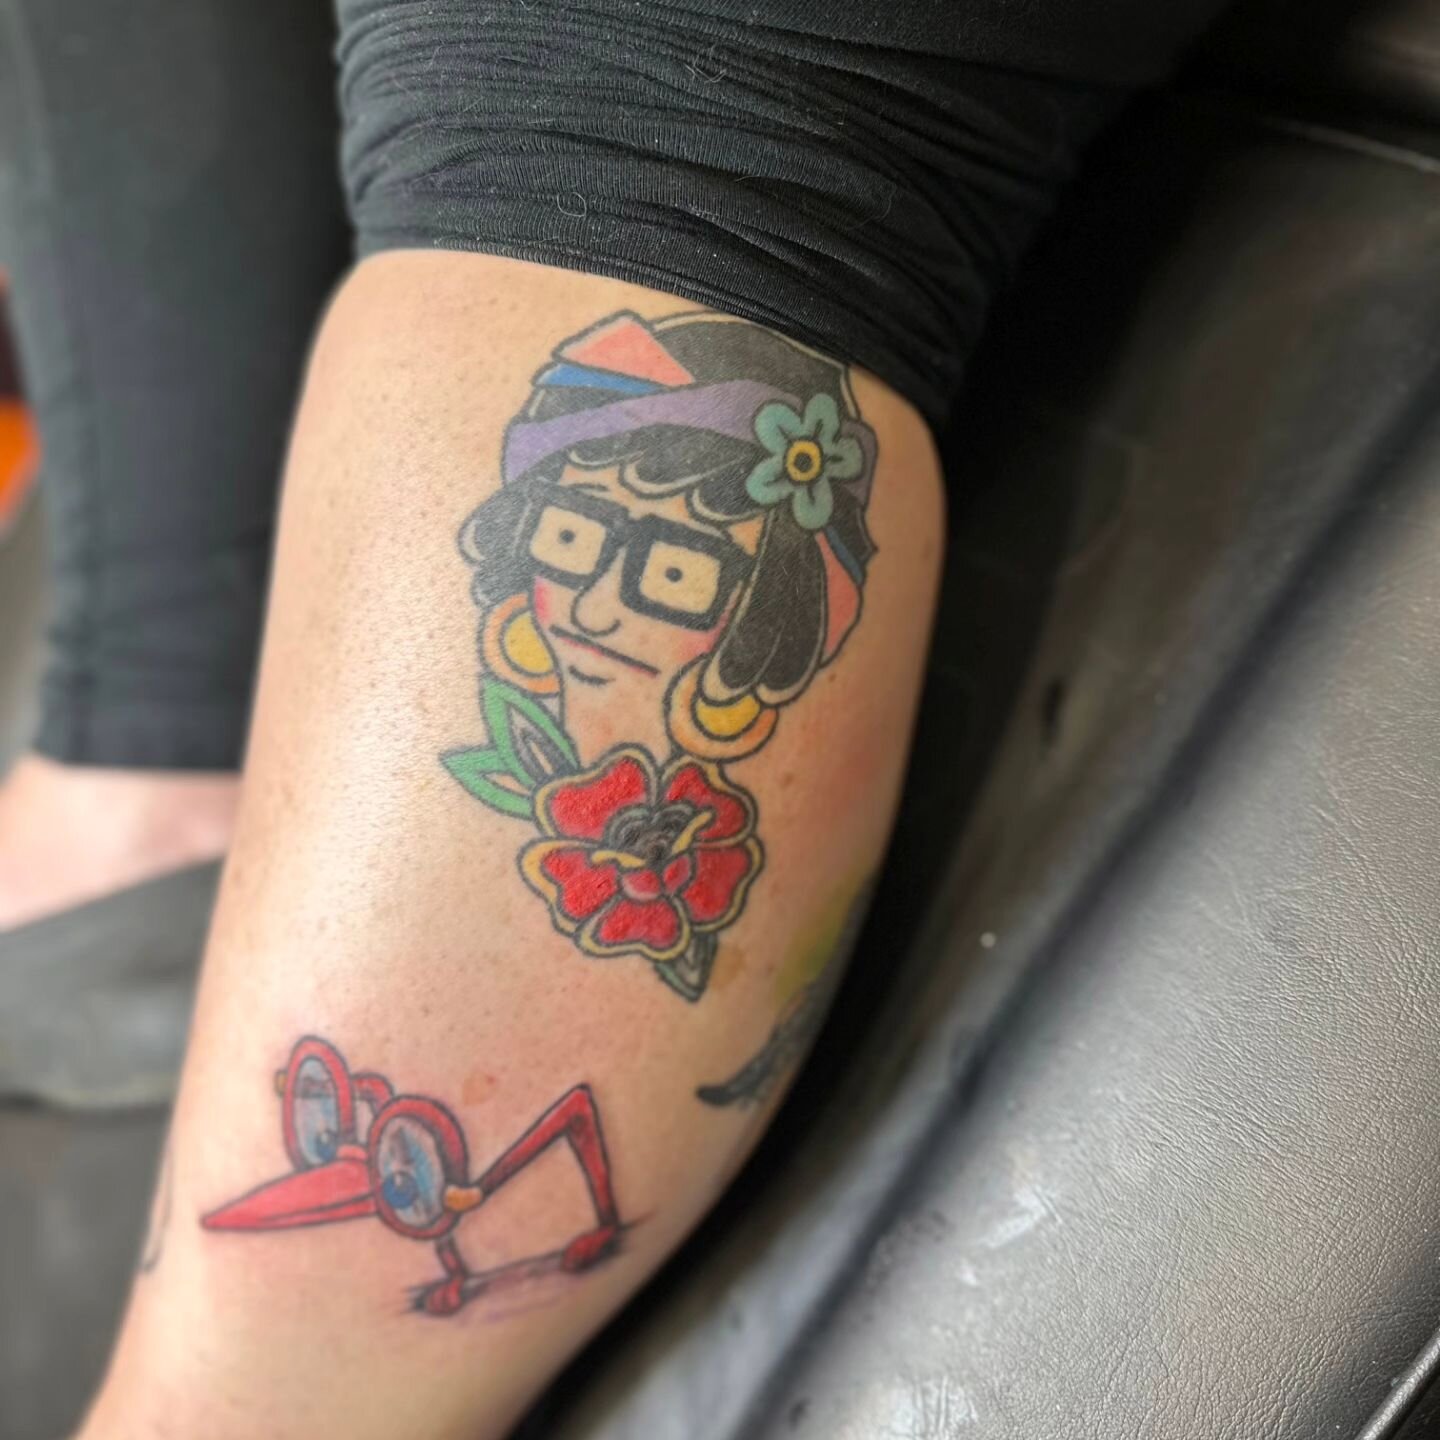 Curiouser and curiouser! This glasses bird from Alice in wonderland actually doesn't look out of place next to the healed Tina 😍
.
.
Follow @rogue_tattoopgh
.

.
.
.
.
.
.
.
.

#412 #tattooflash #pittsburghartist #tattooart #tattooer #pittsburghtatt